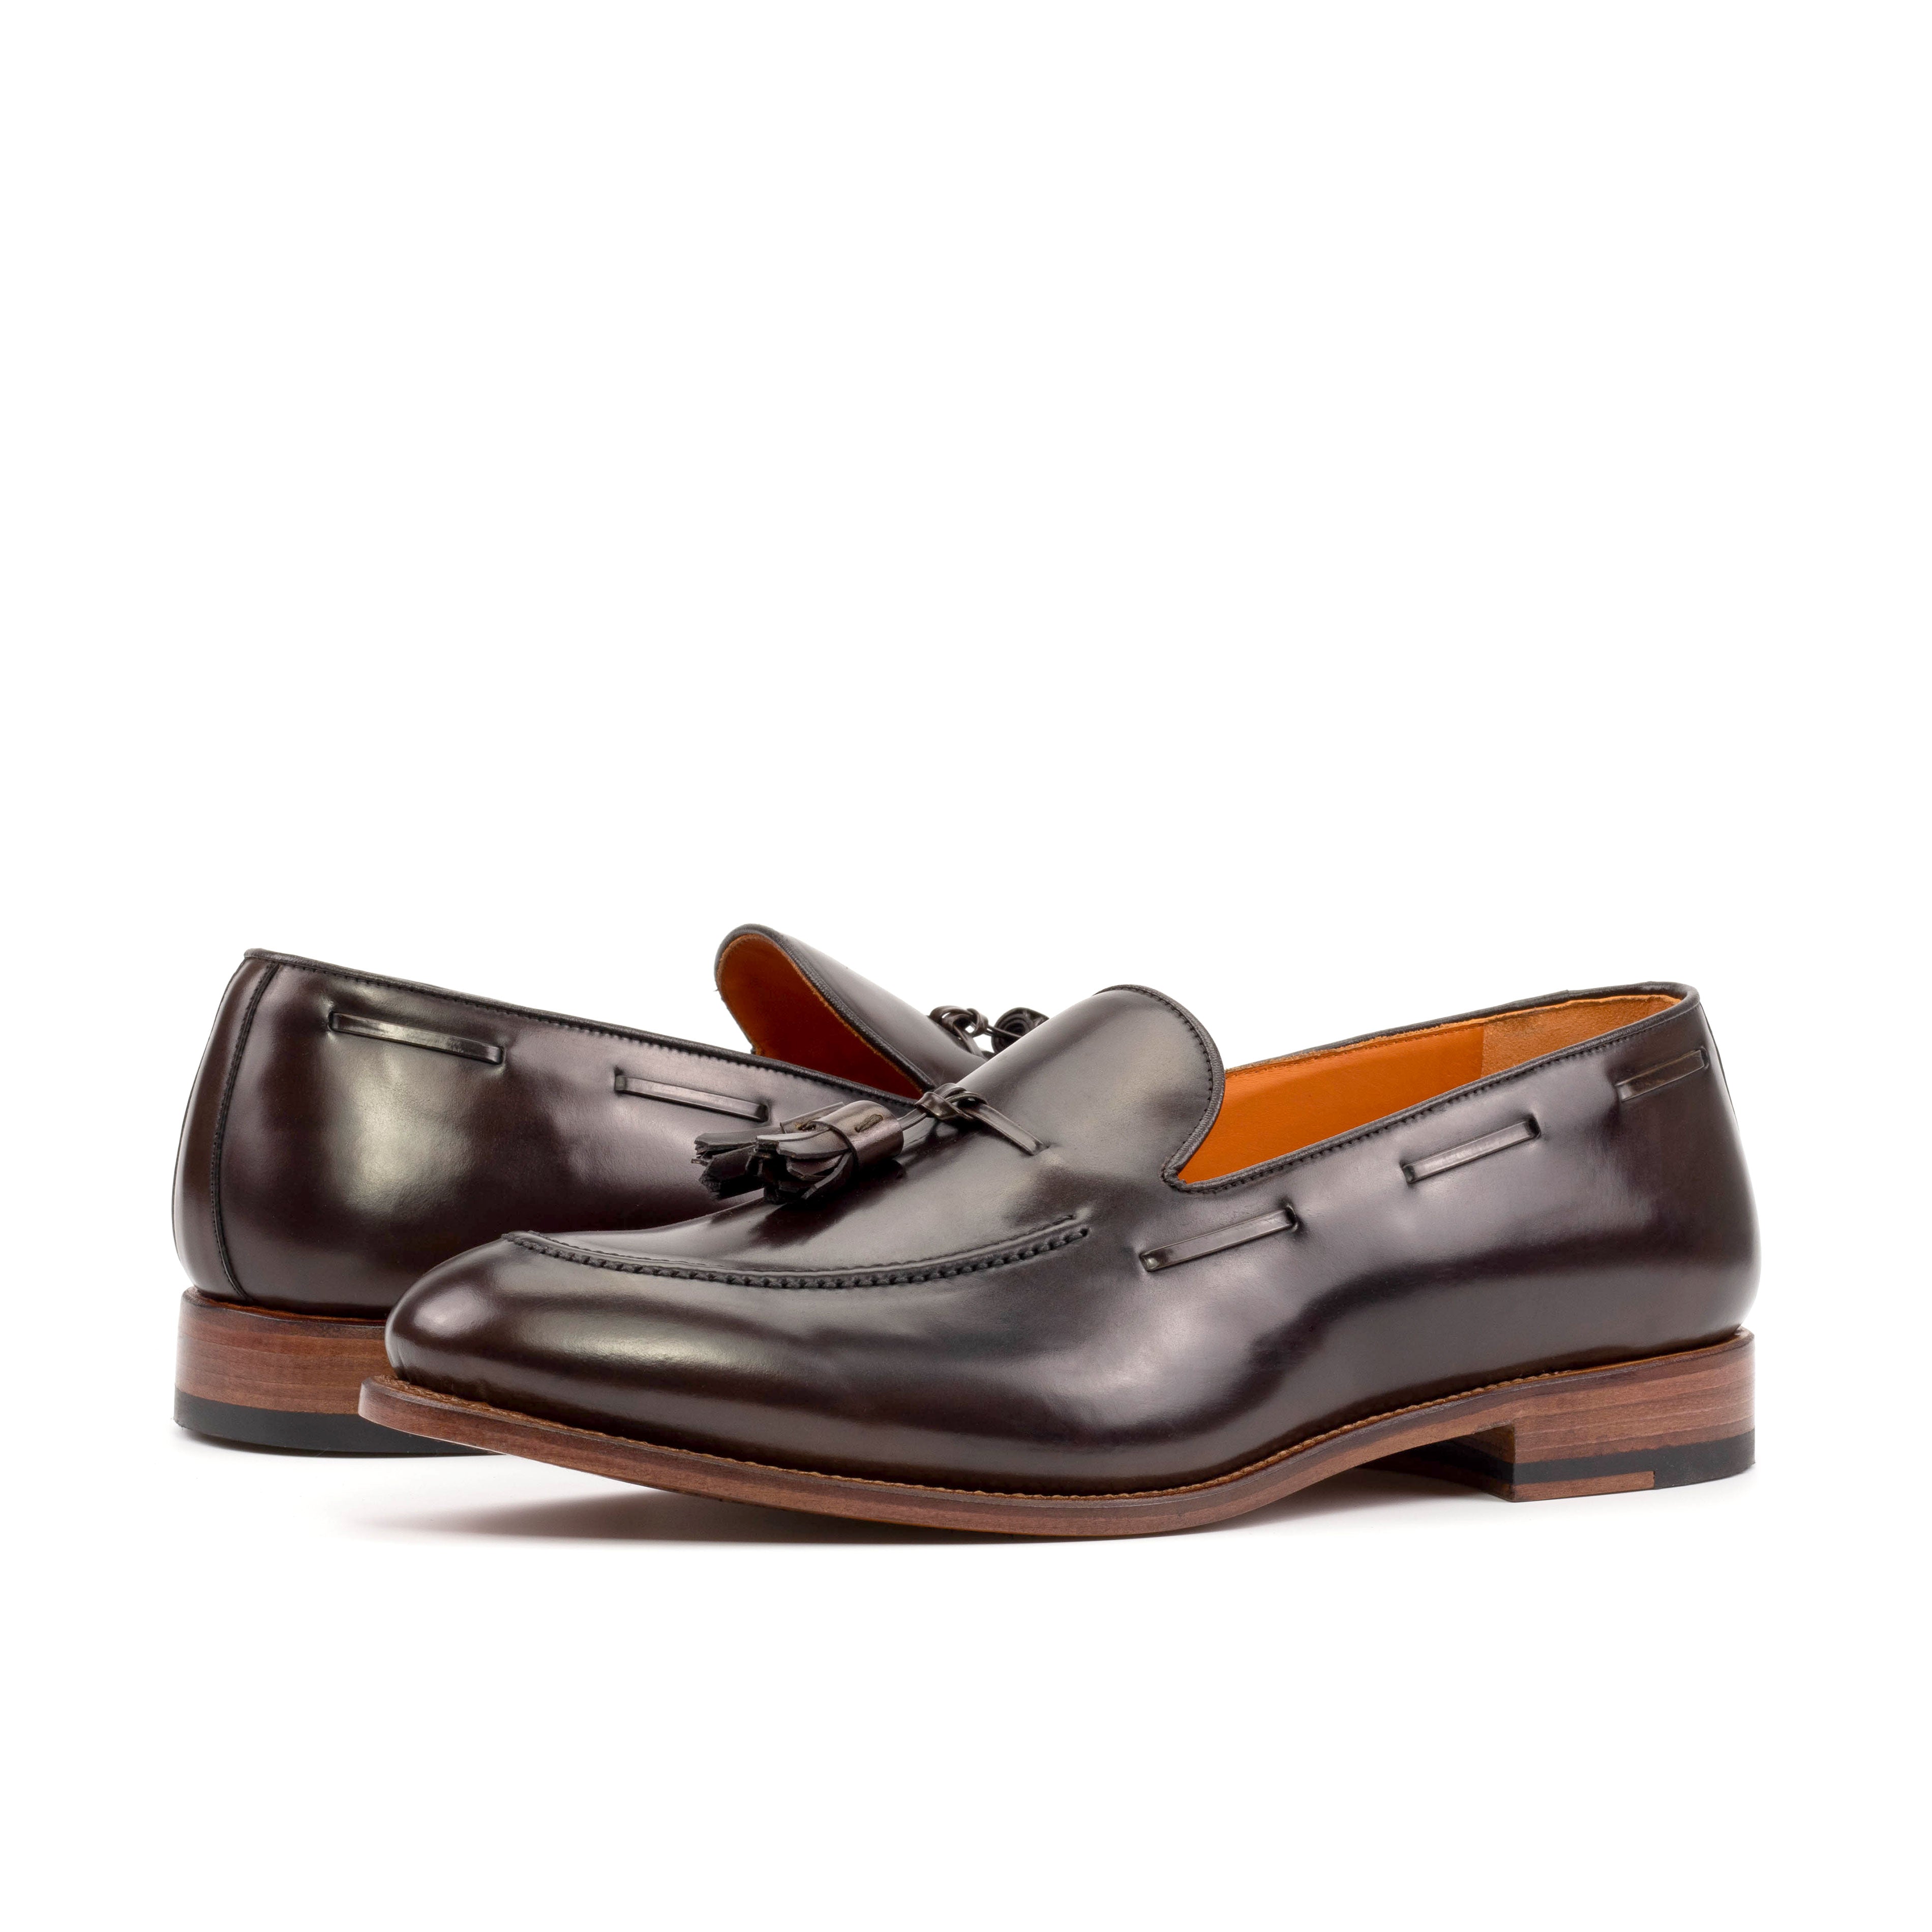 The Graduate Loafer (Shell Cordovan)